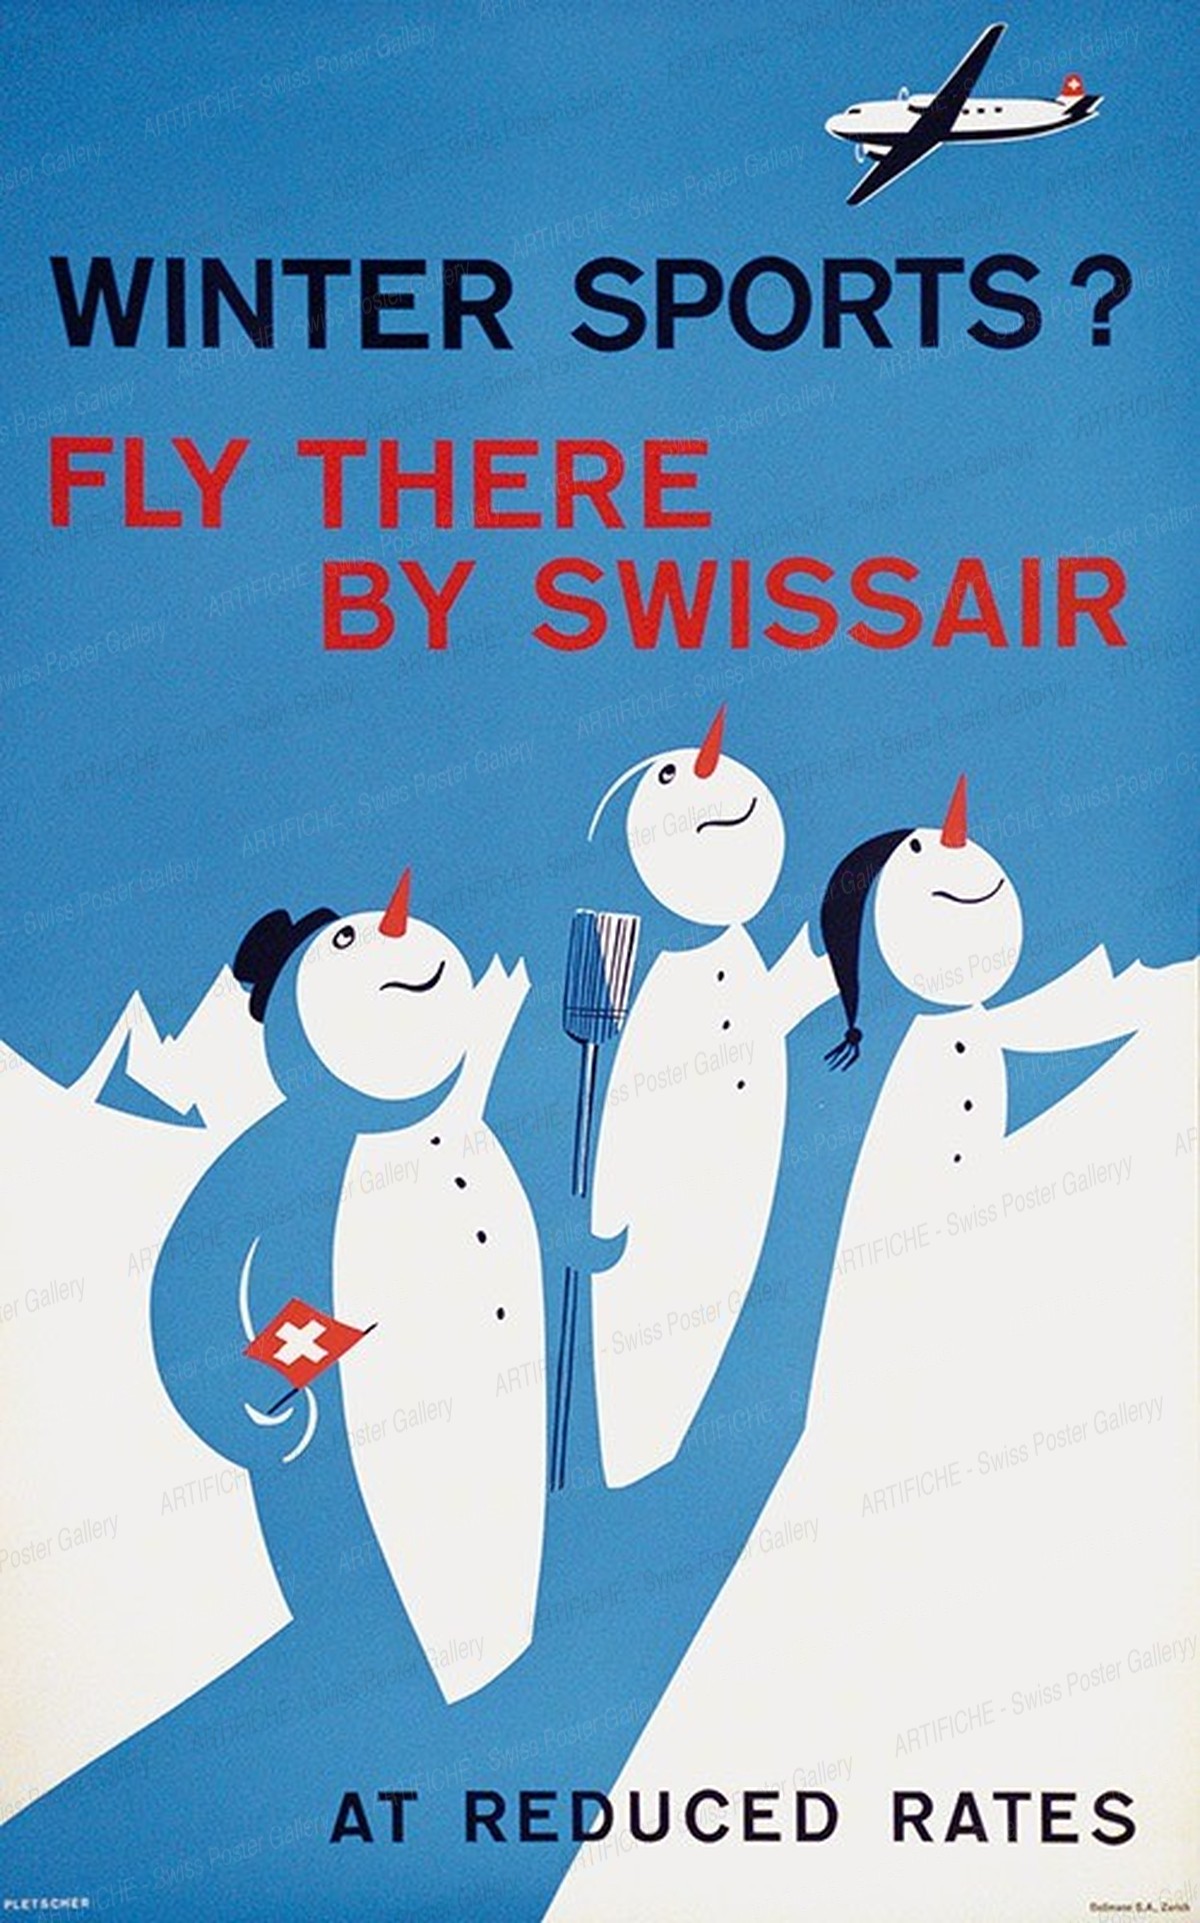 Winter Sports ? Fly there by Swissair – at reduced rates, Pletscher Fredy